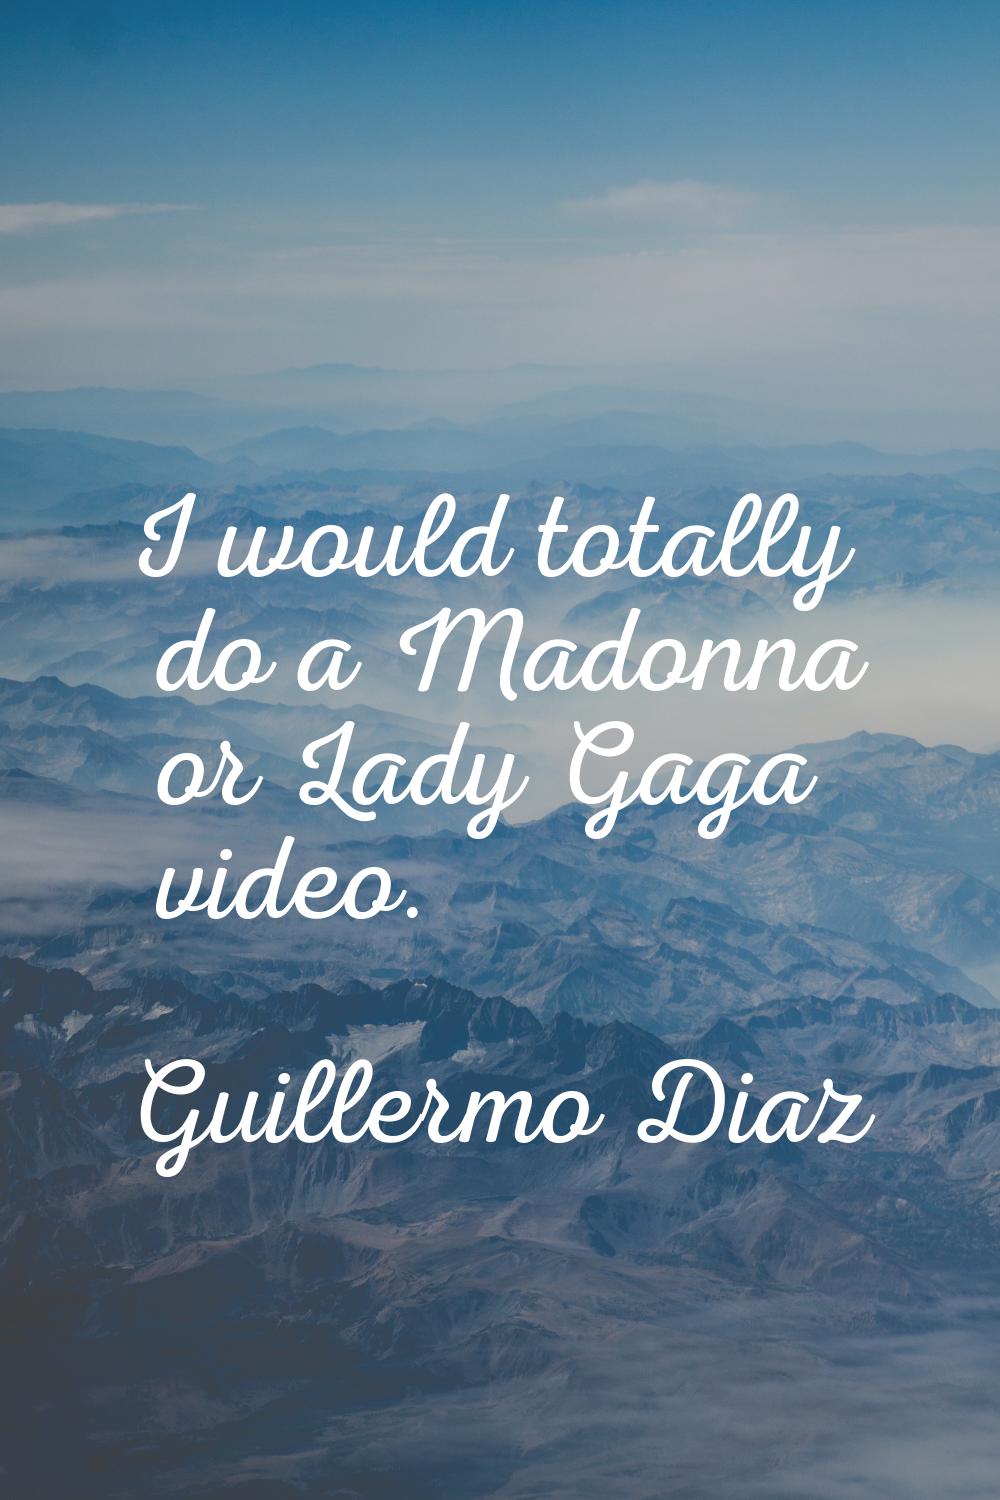 I would totally do a Madonna or Lady Gaga video.